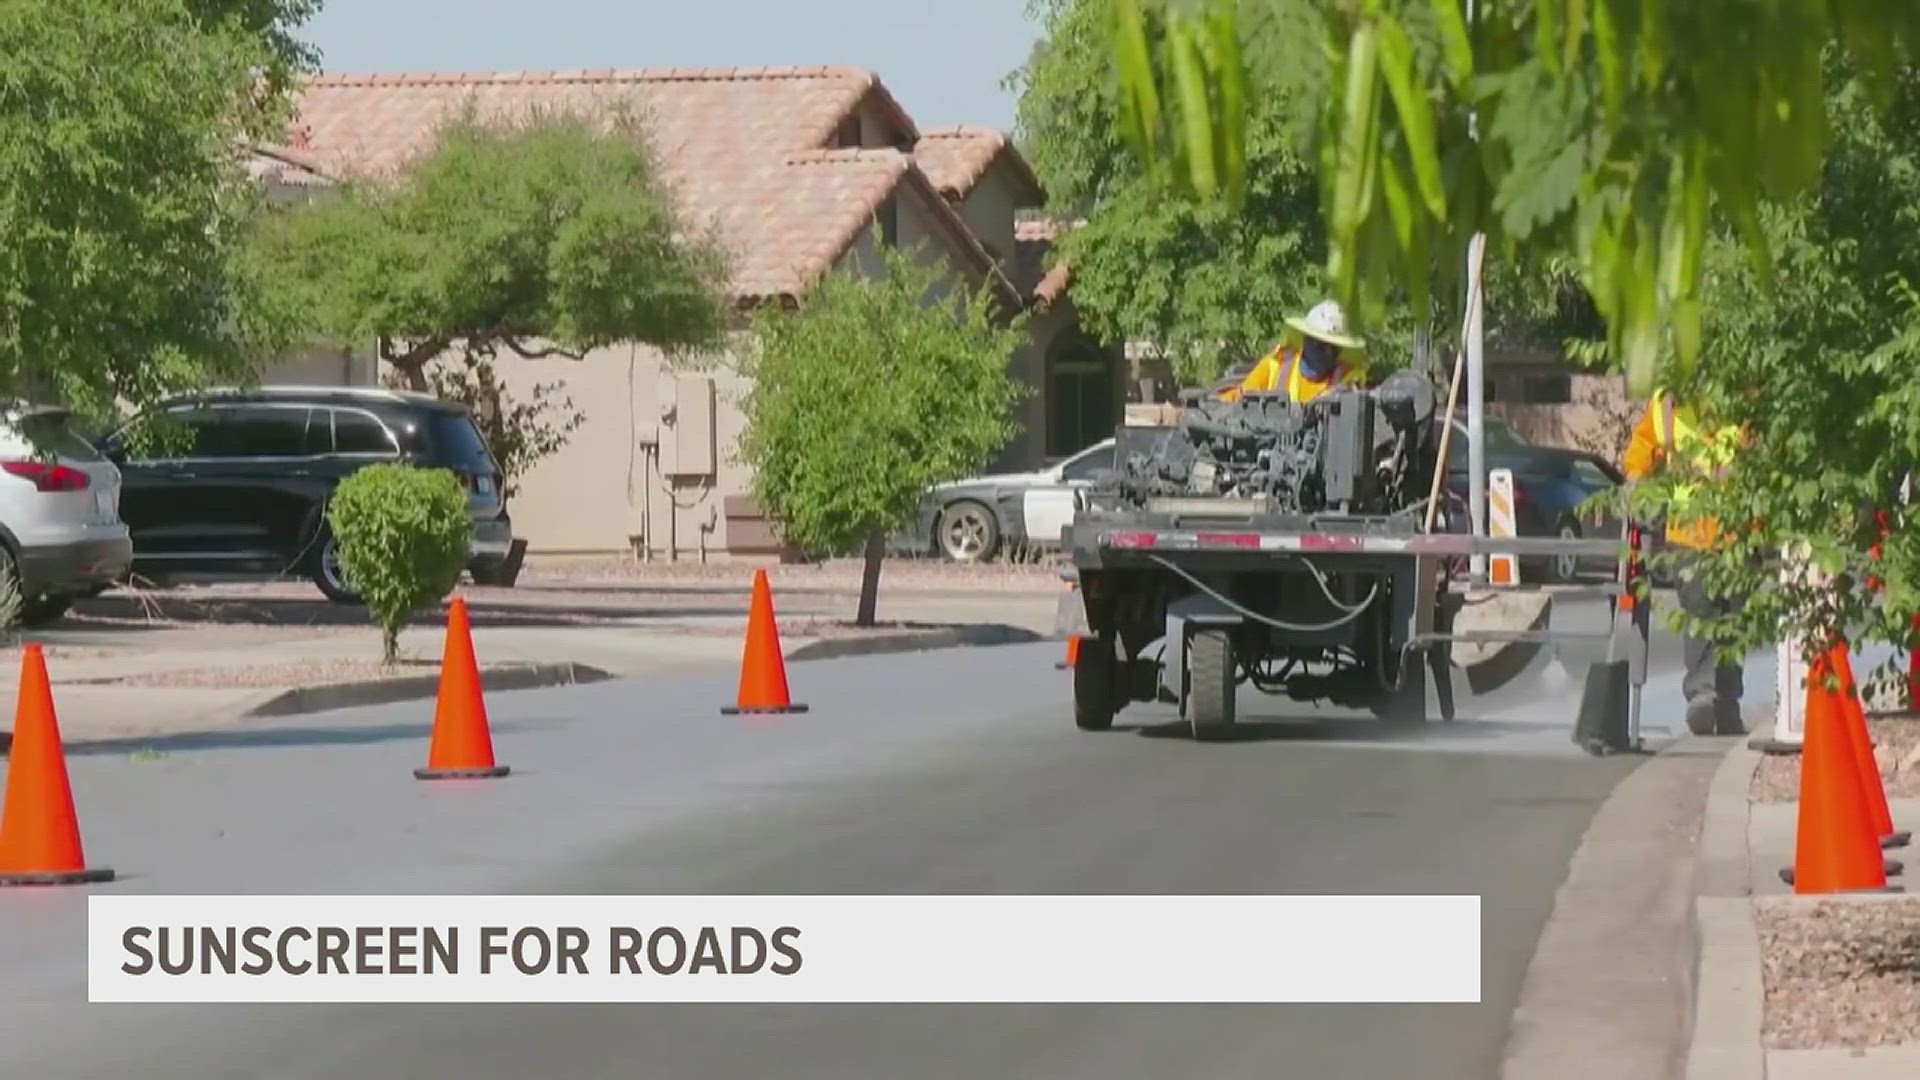 By using a grey coating designed to reflect heat and sunlight away from the surface, Phoenix hopes to create cooler streets and mitigate the urban heat effect.